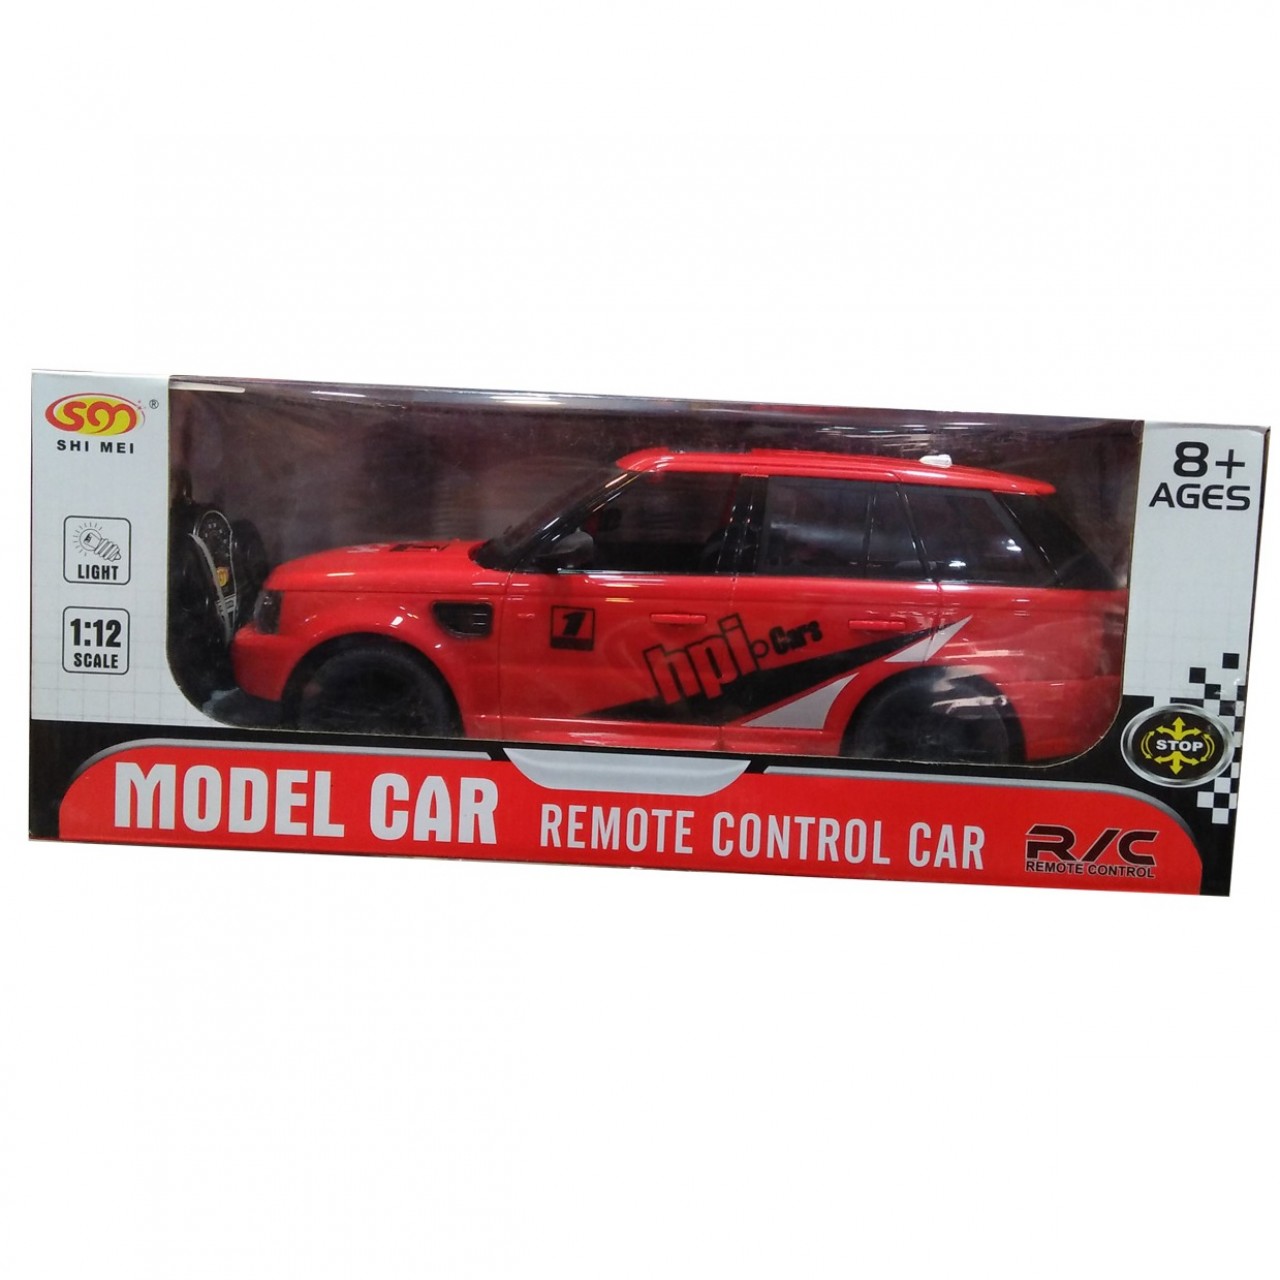 Model Remote Control Car For 8+ Ages - Red